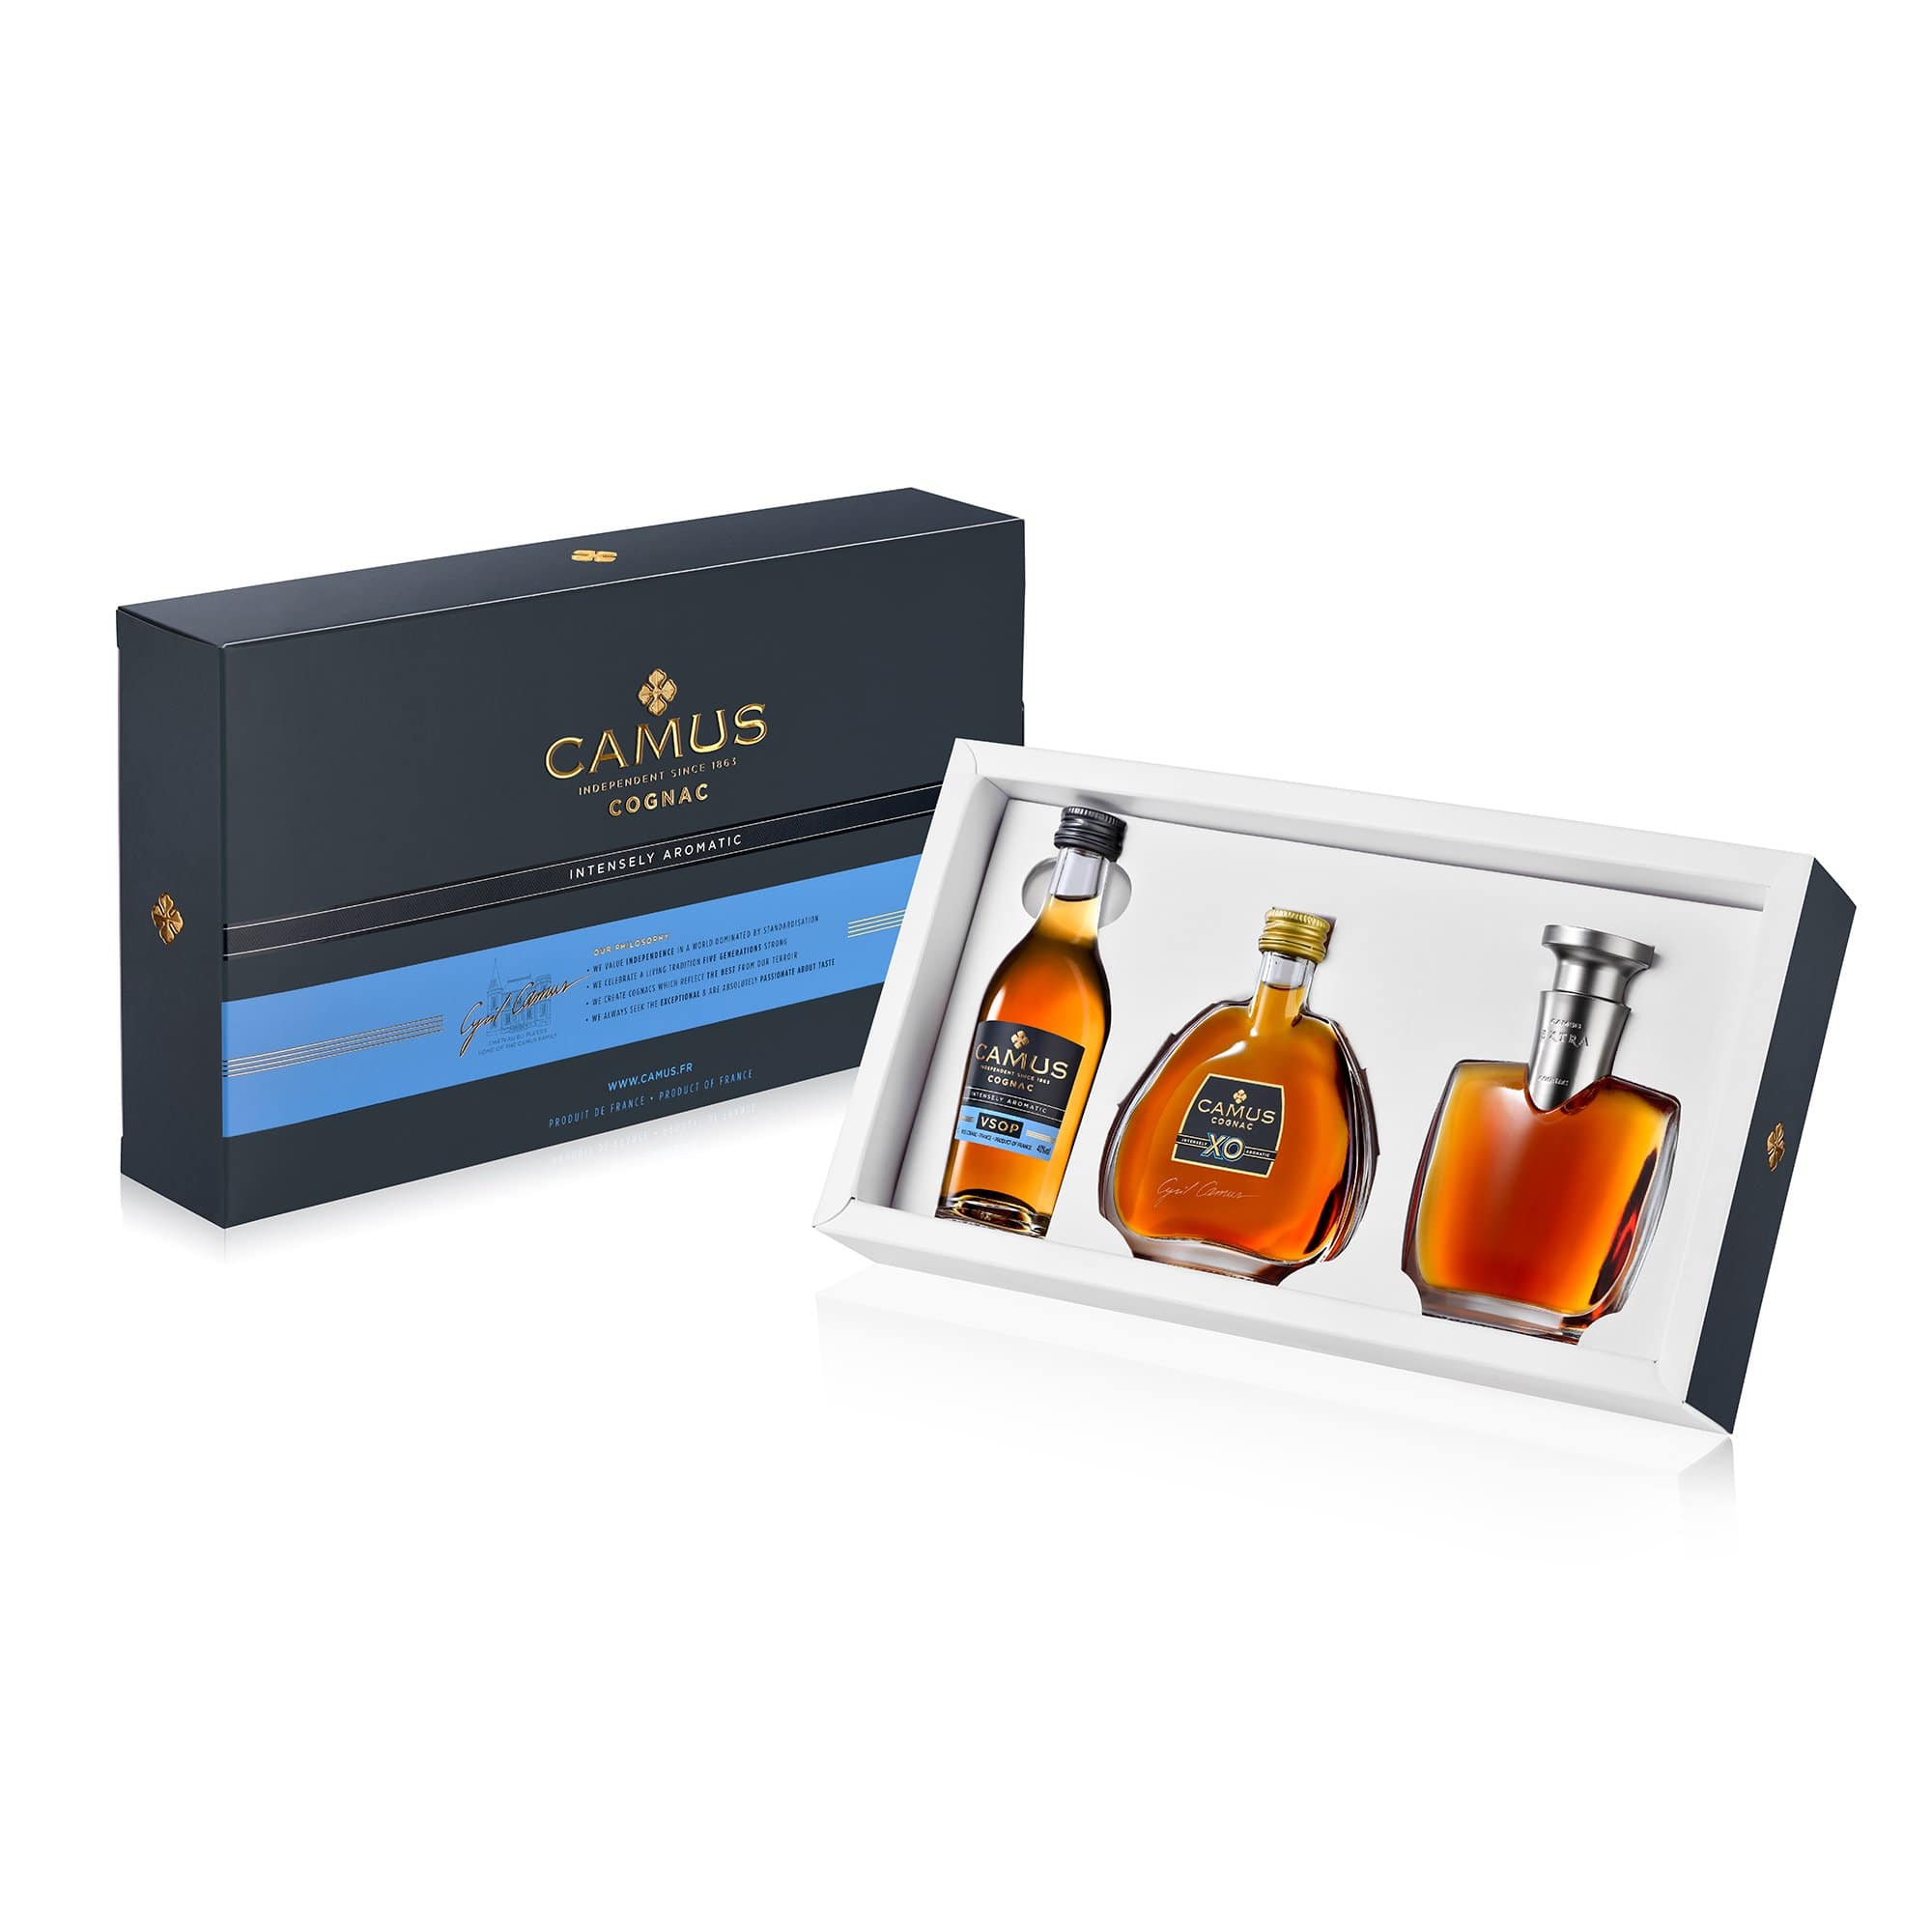 CAMUS COGNAC MINI SET COLLECTION INTENSELY AROMATIC (VSOP - XO - EXTRA